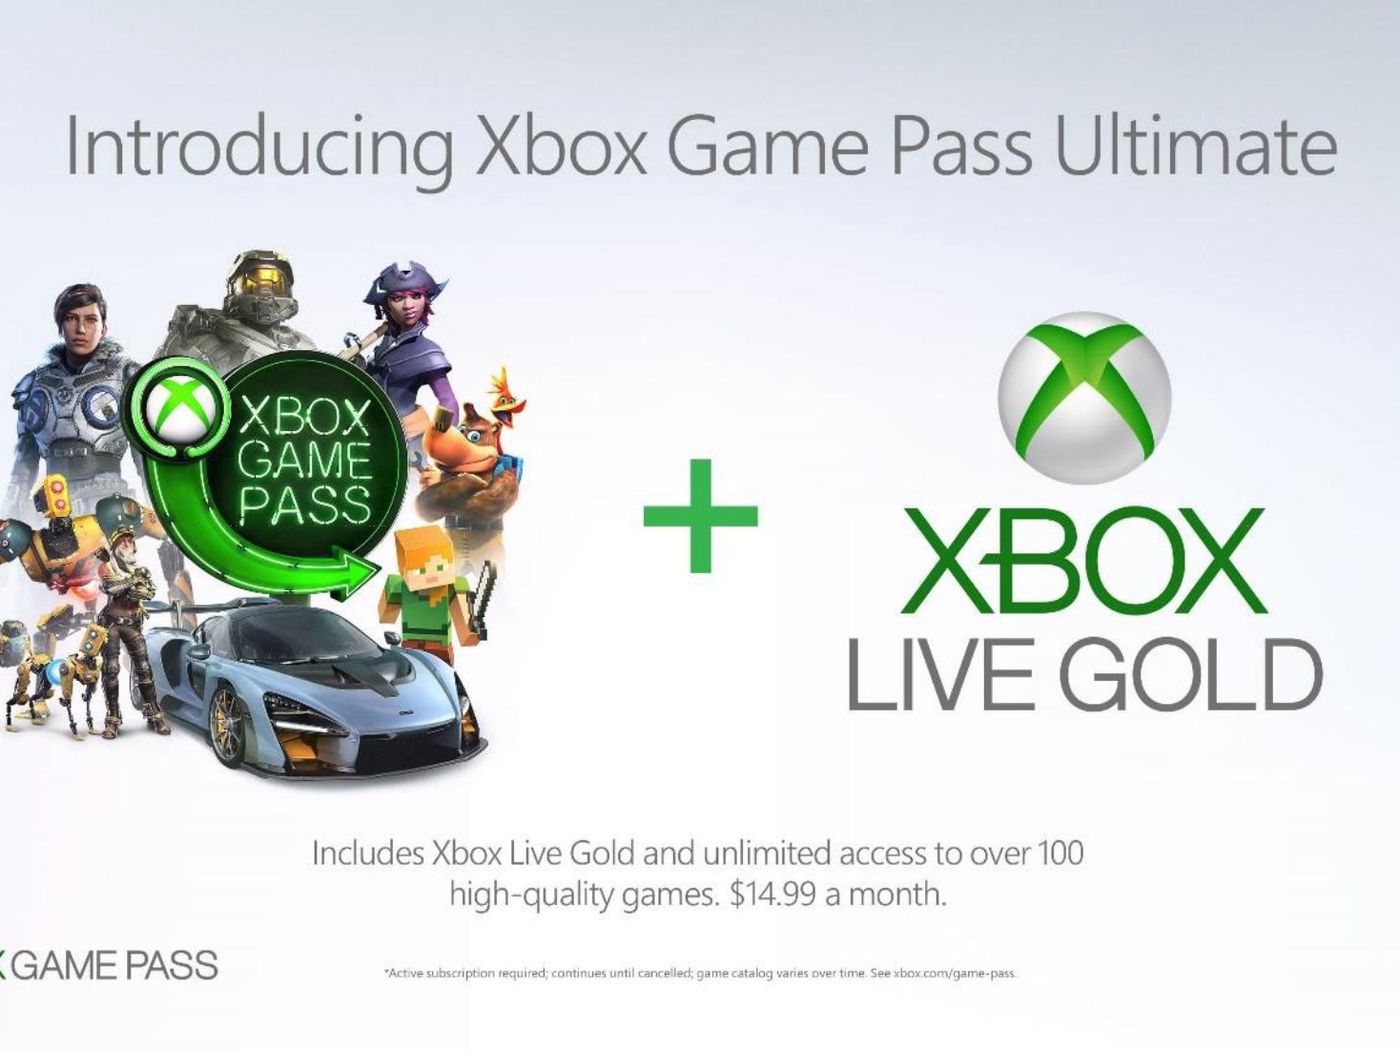 afwijzing helder Contract Xbox Game Pass Ultimate: Xbox Live and Xbox Game Pass for $14.99 a month -  The Verge